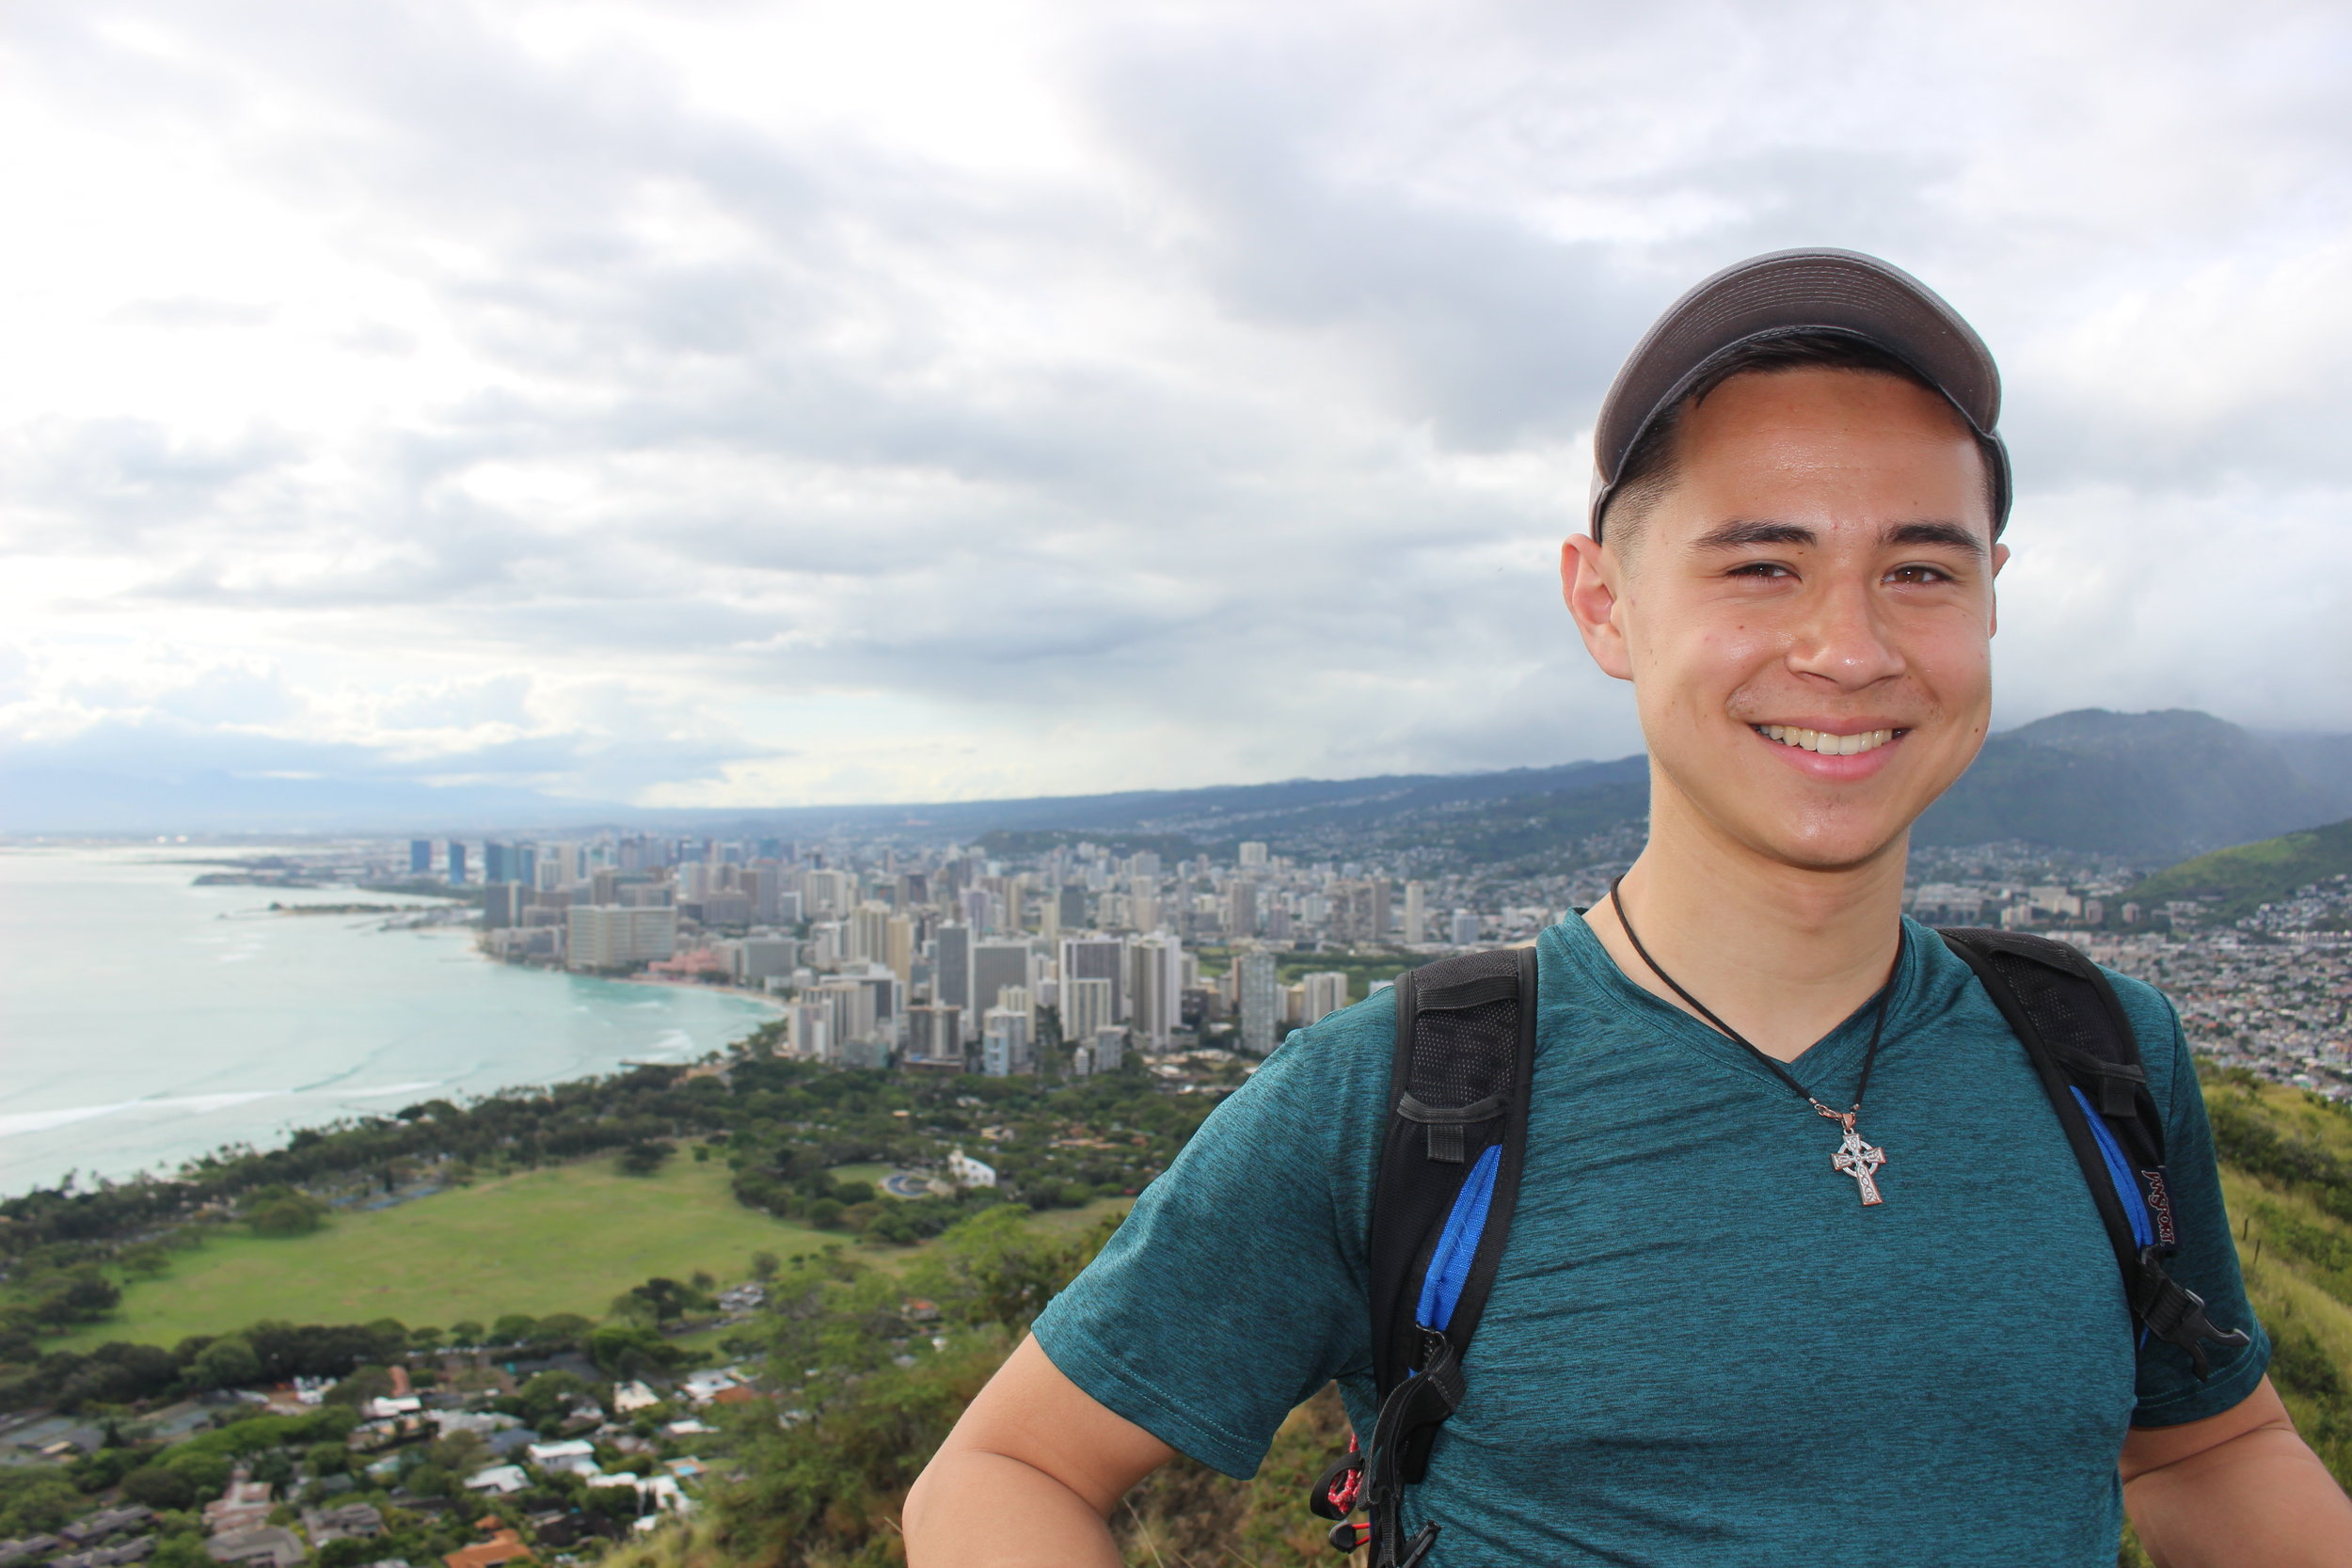  Liam ‘21 after hiking Diamond Head, with a view of Honolulu 